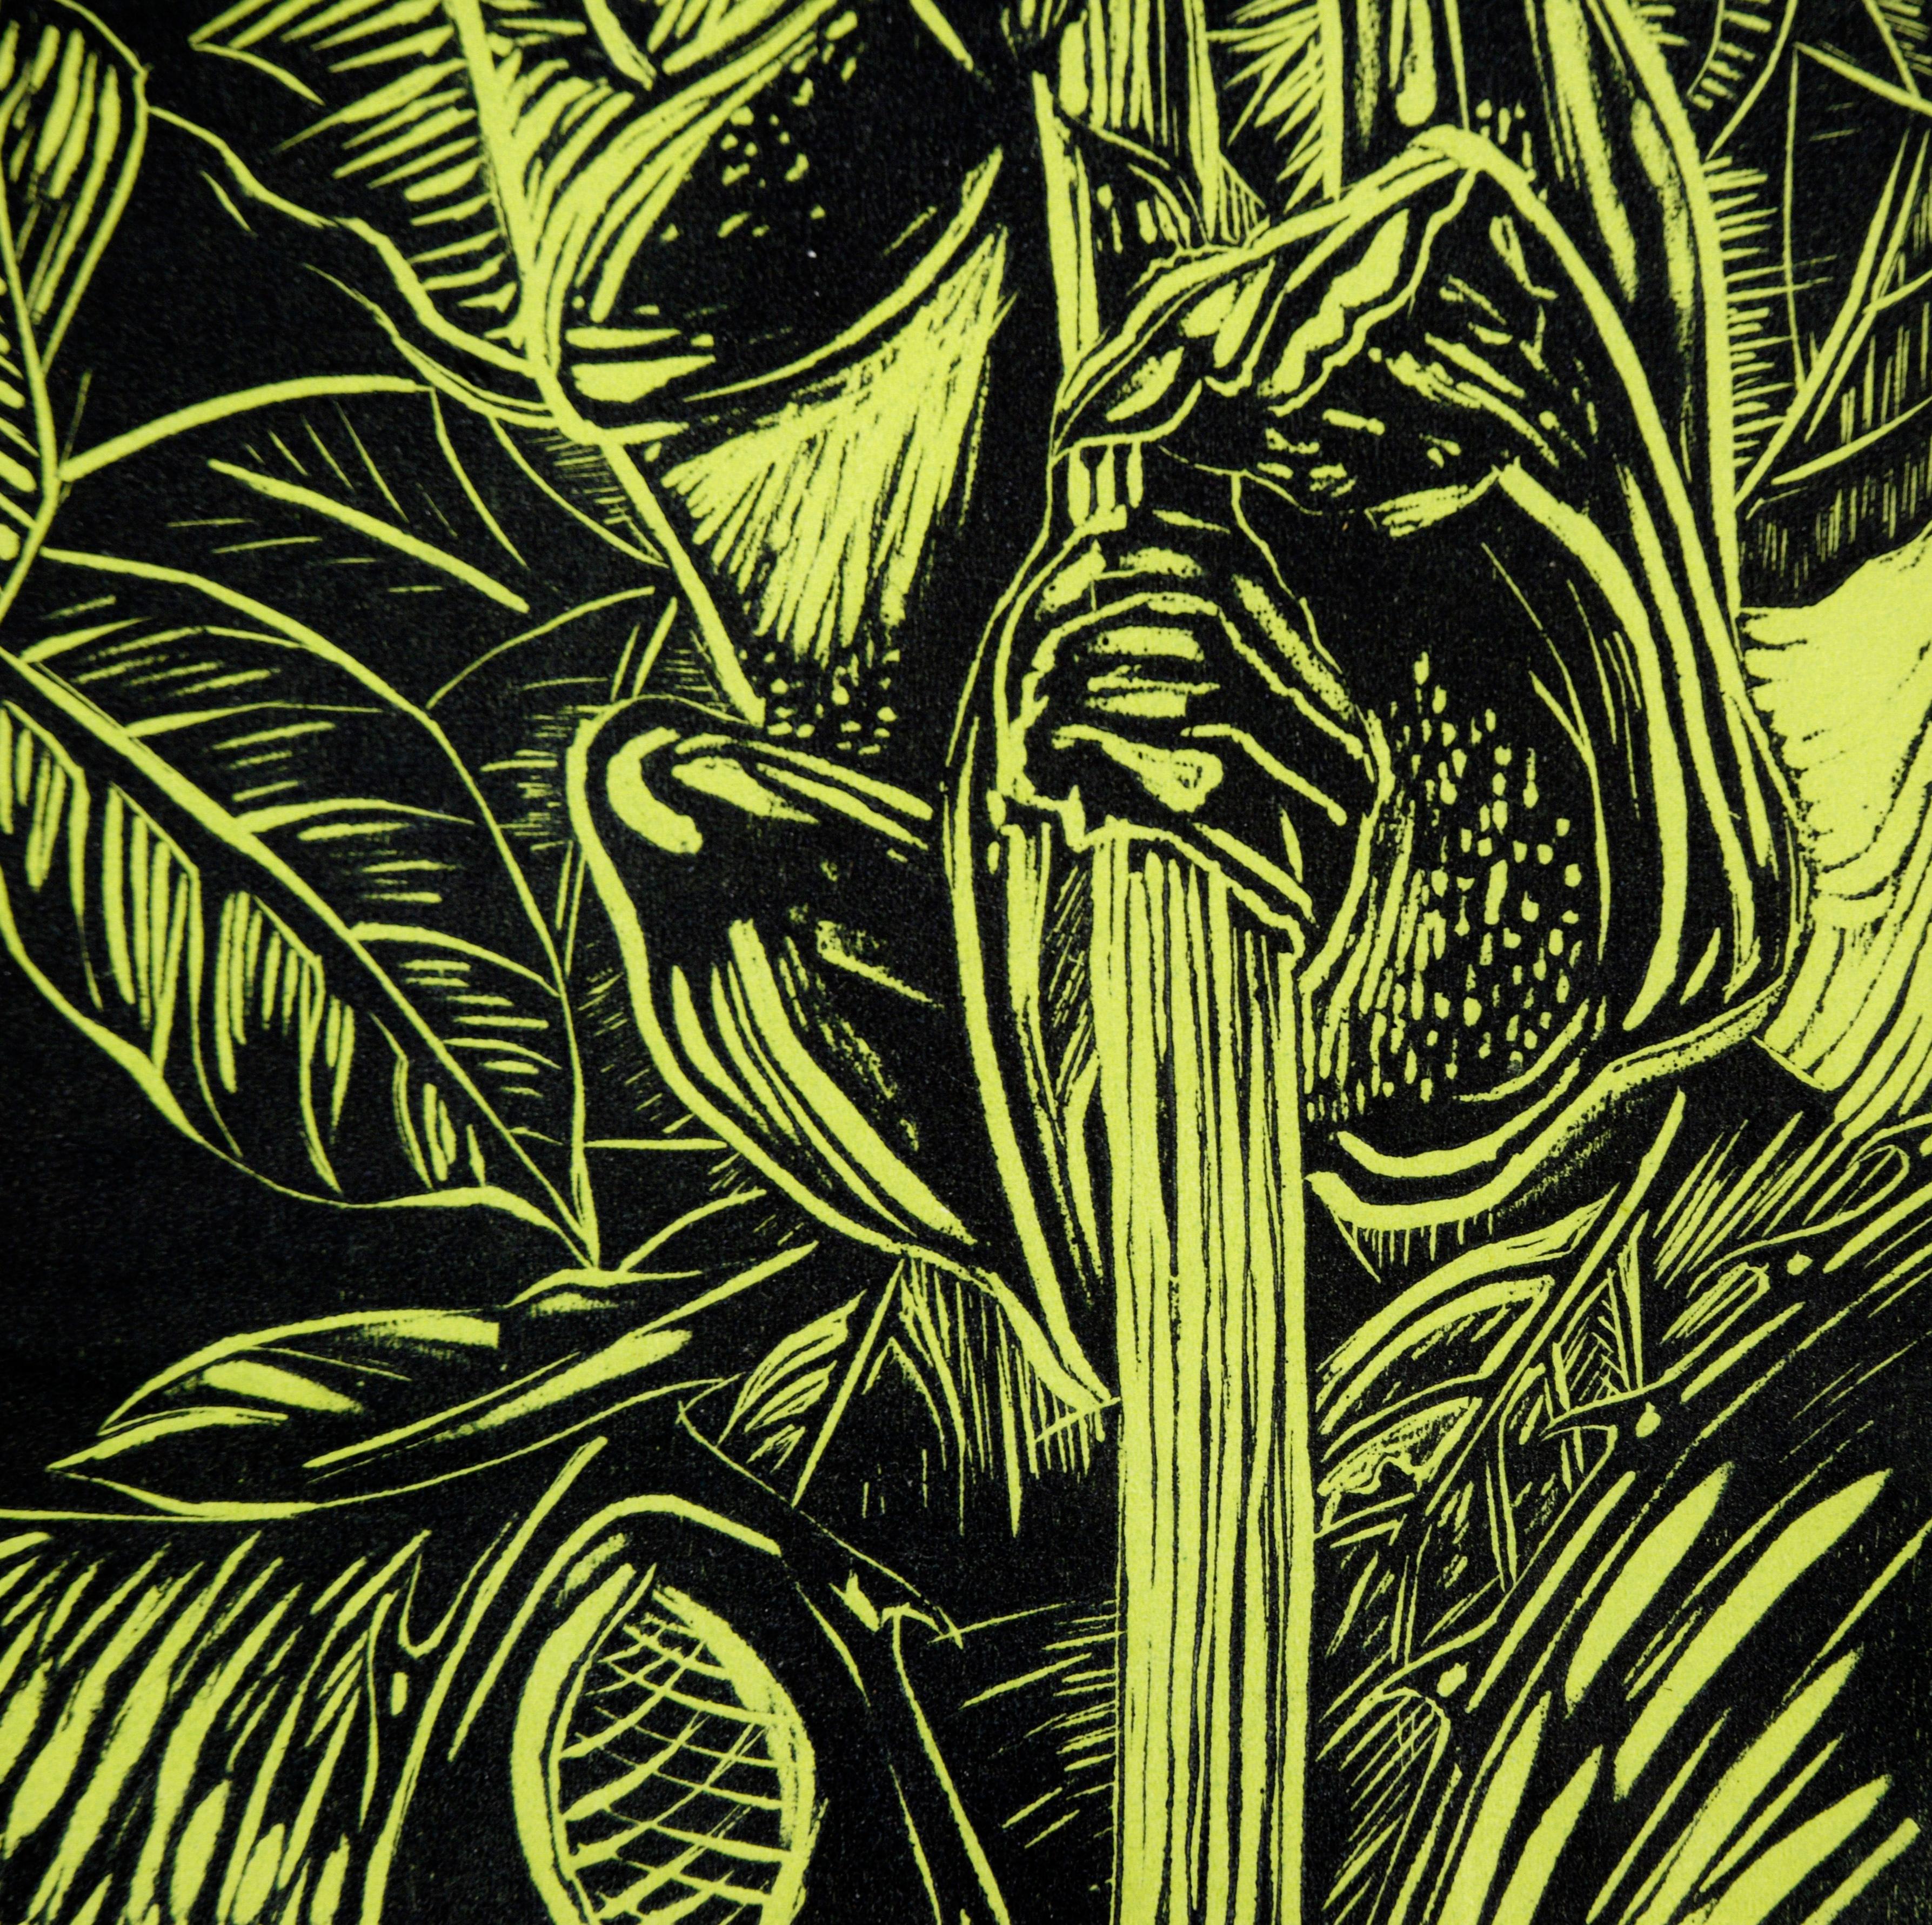 Bold linocut proof print by an unknown artist (20th Century). A green-yellow underlayer shows through a bold black top layer, creating a strong contrast of highlights and shadows. A tree frog climbs up a stalk in the middle of the jungle. There are